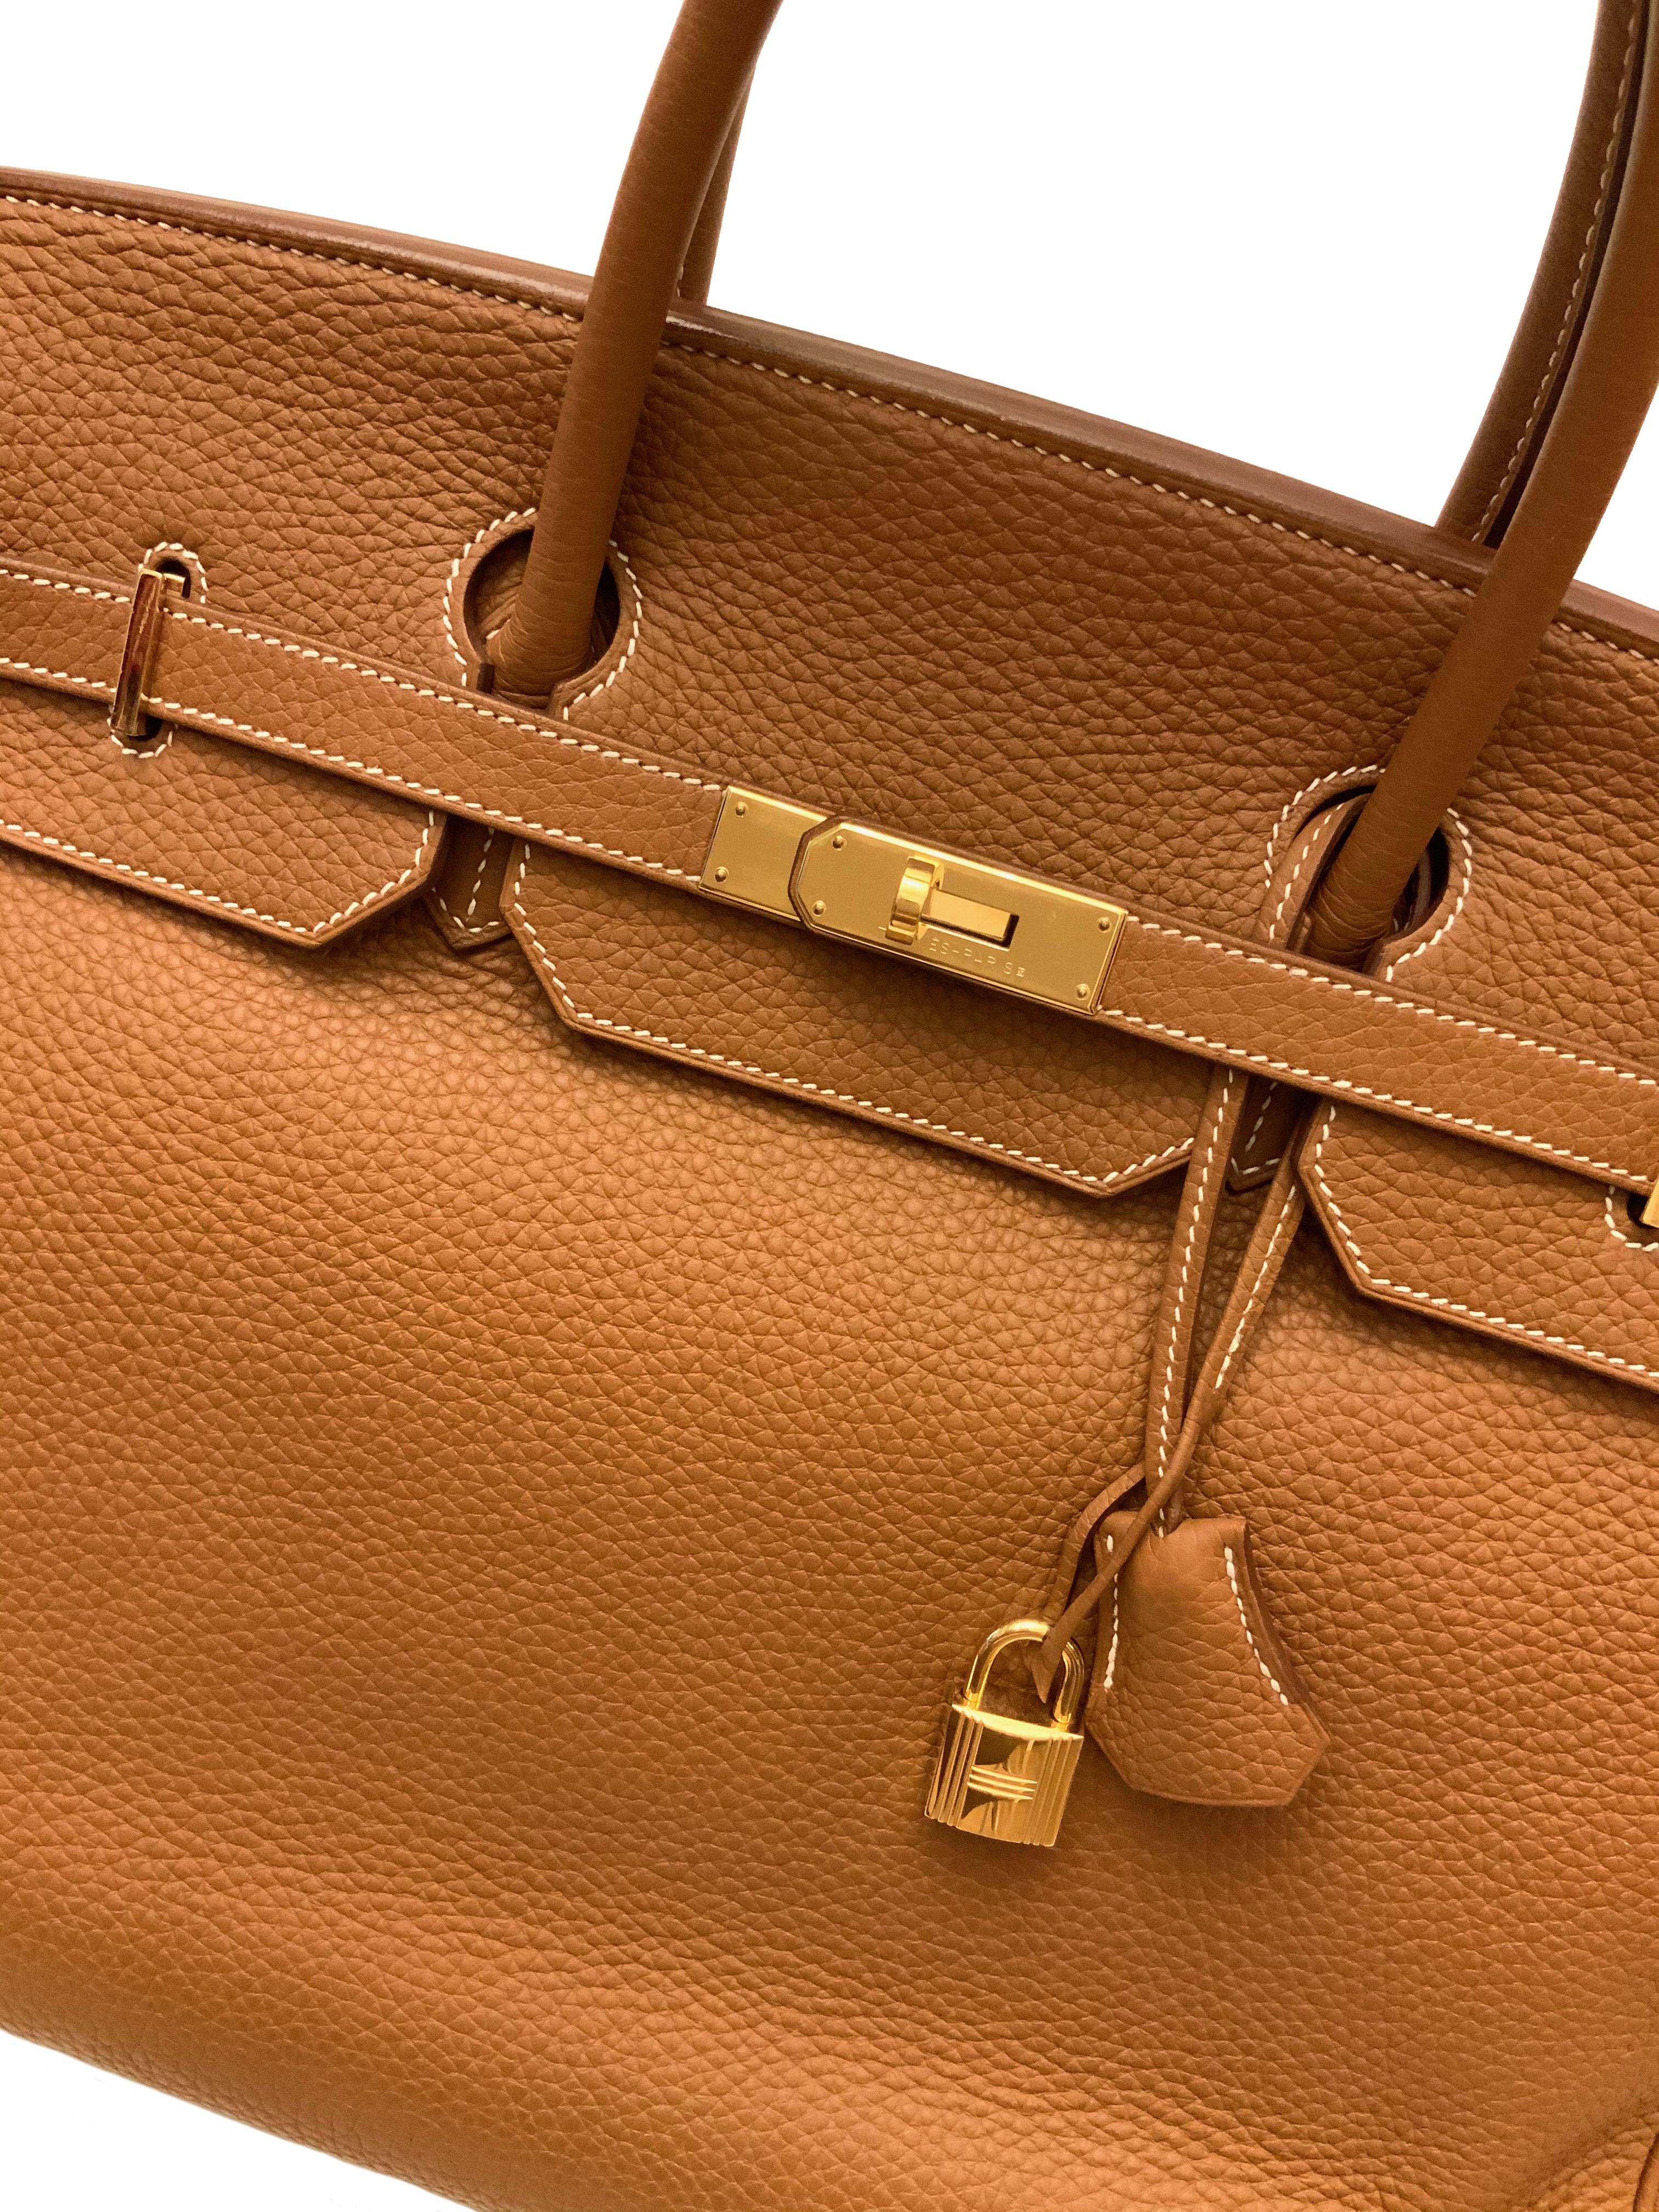 A classic from the house of Hermès, the Birkin 40 in Togo leather.
Its gold color mix with light color stitches is a must in the chic look for any occasions ! 
Although it is from 2011 and pre-owned, it is in fabulous condition !

Year: